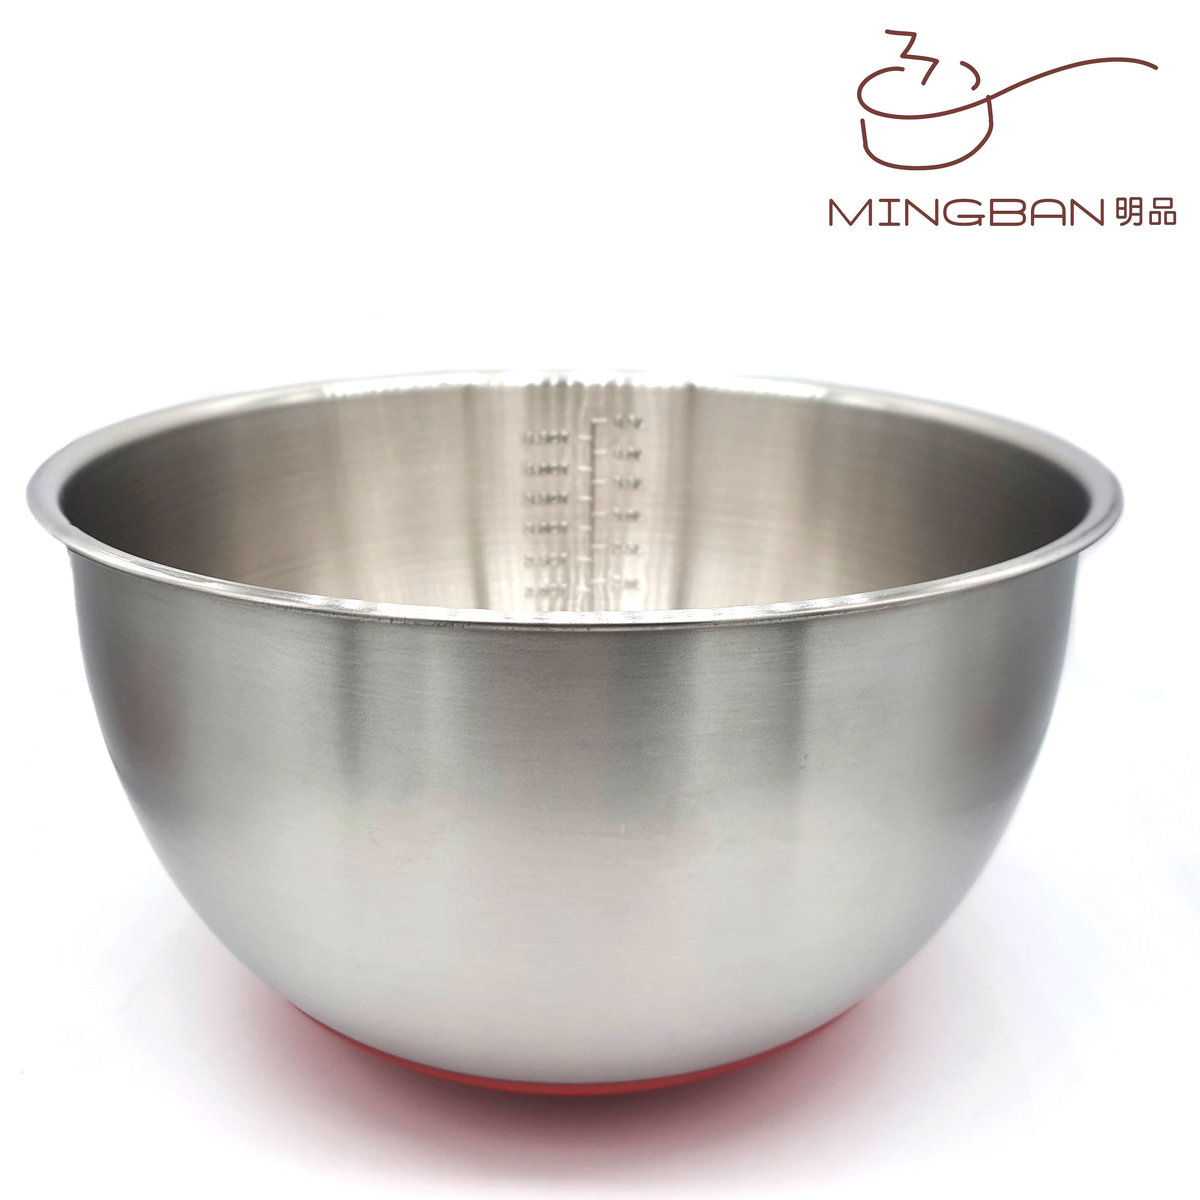 304 Stainless Steel 24cm Mixing Bowl with non-slip silicone bottom and inner measurement marks - 1.0L, 1.5L, 2.0L, 2.5L, 3.0L, 3.5L, 4.0L, 4.5L